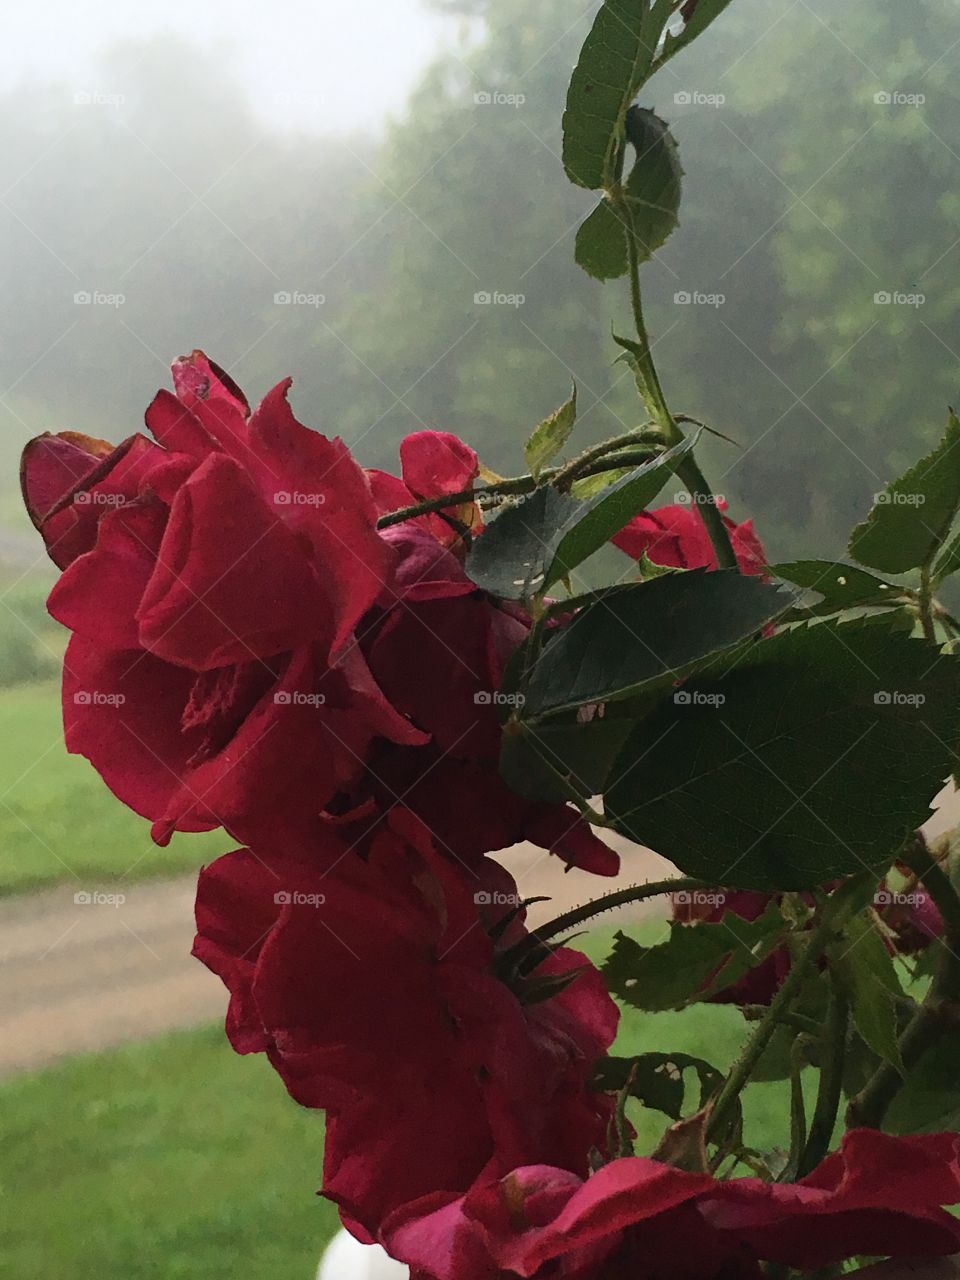 Roses in the early morning fog.